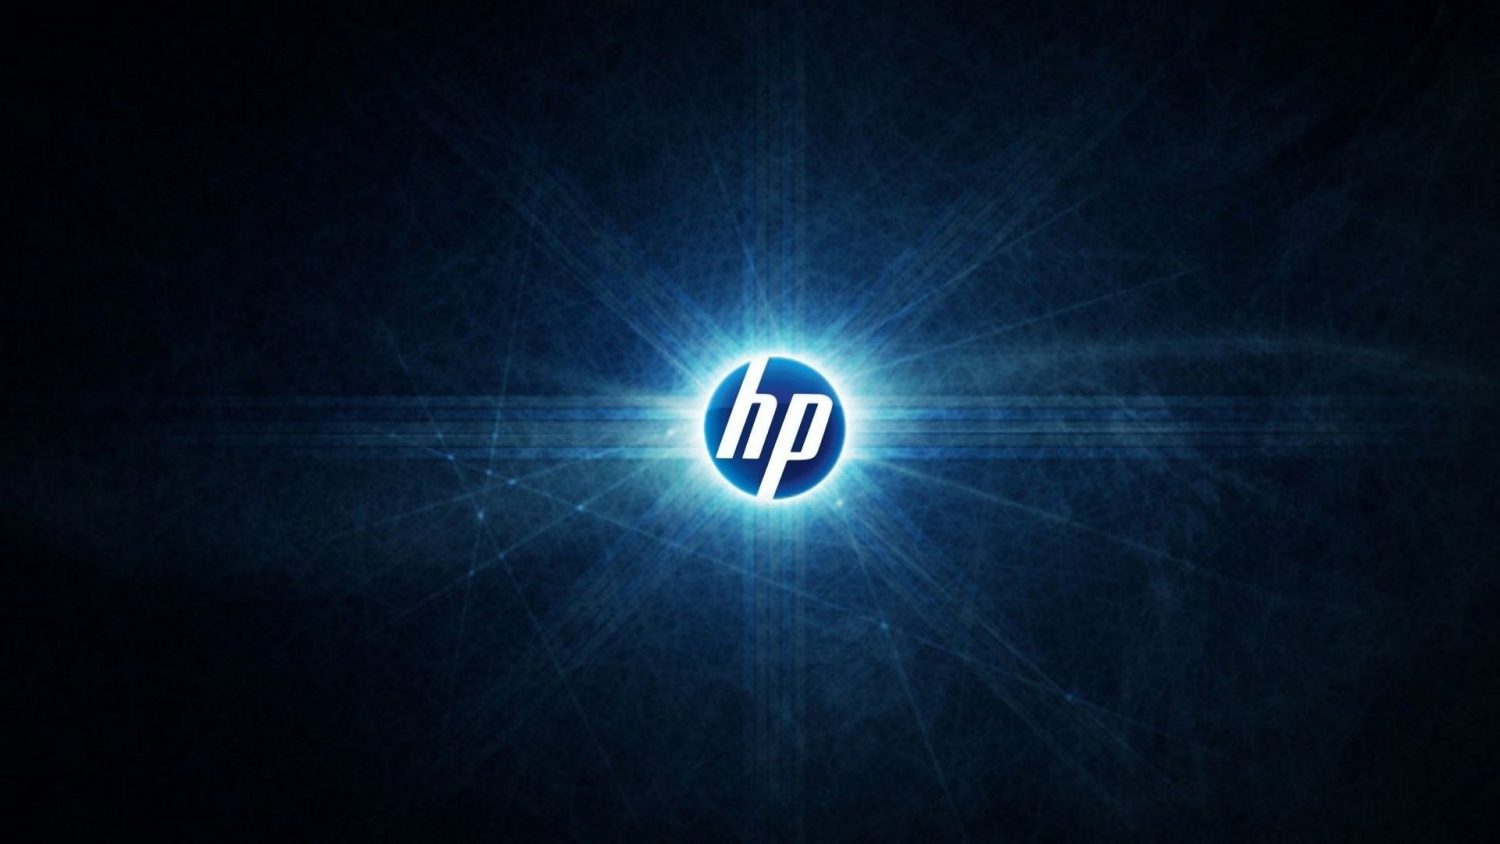 Take control of your print environment with hp’s managed print services